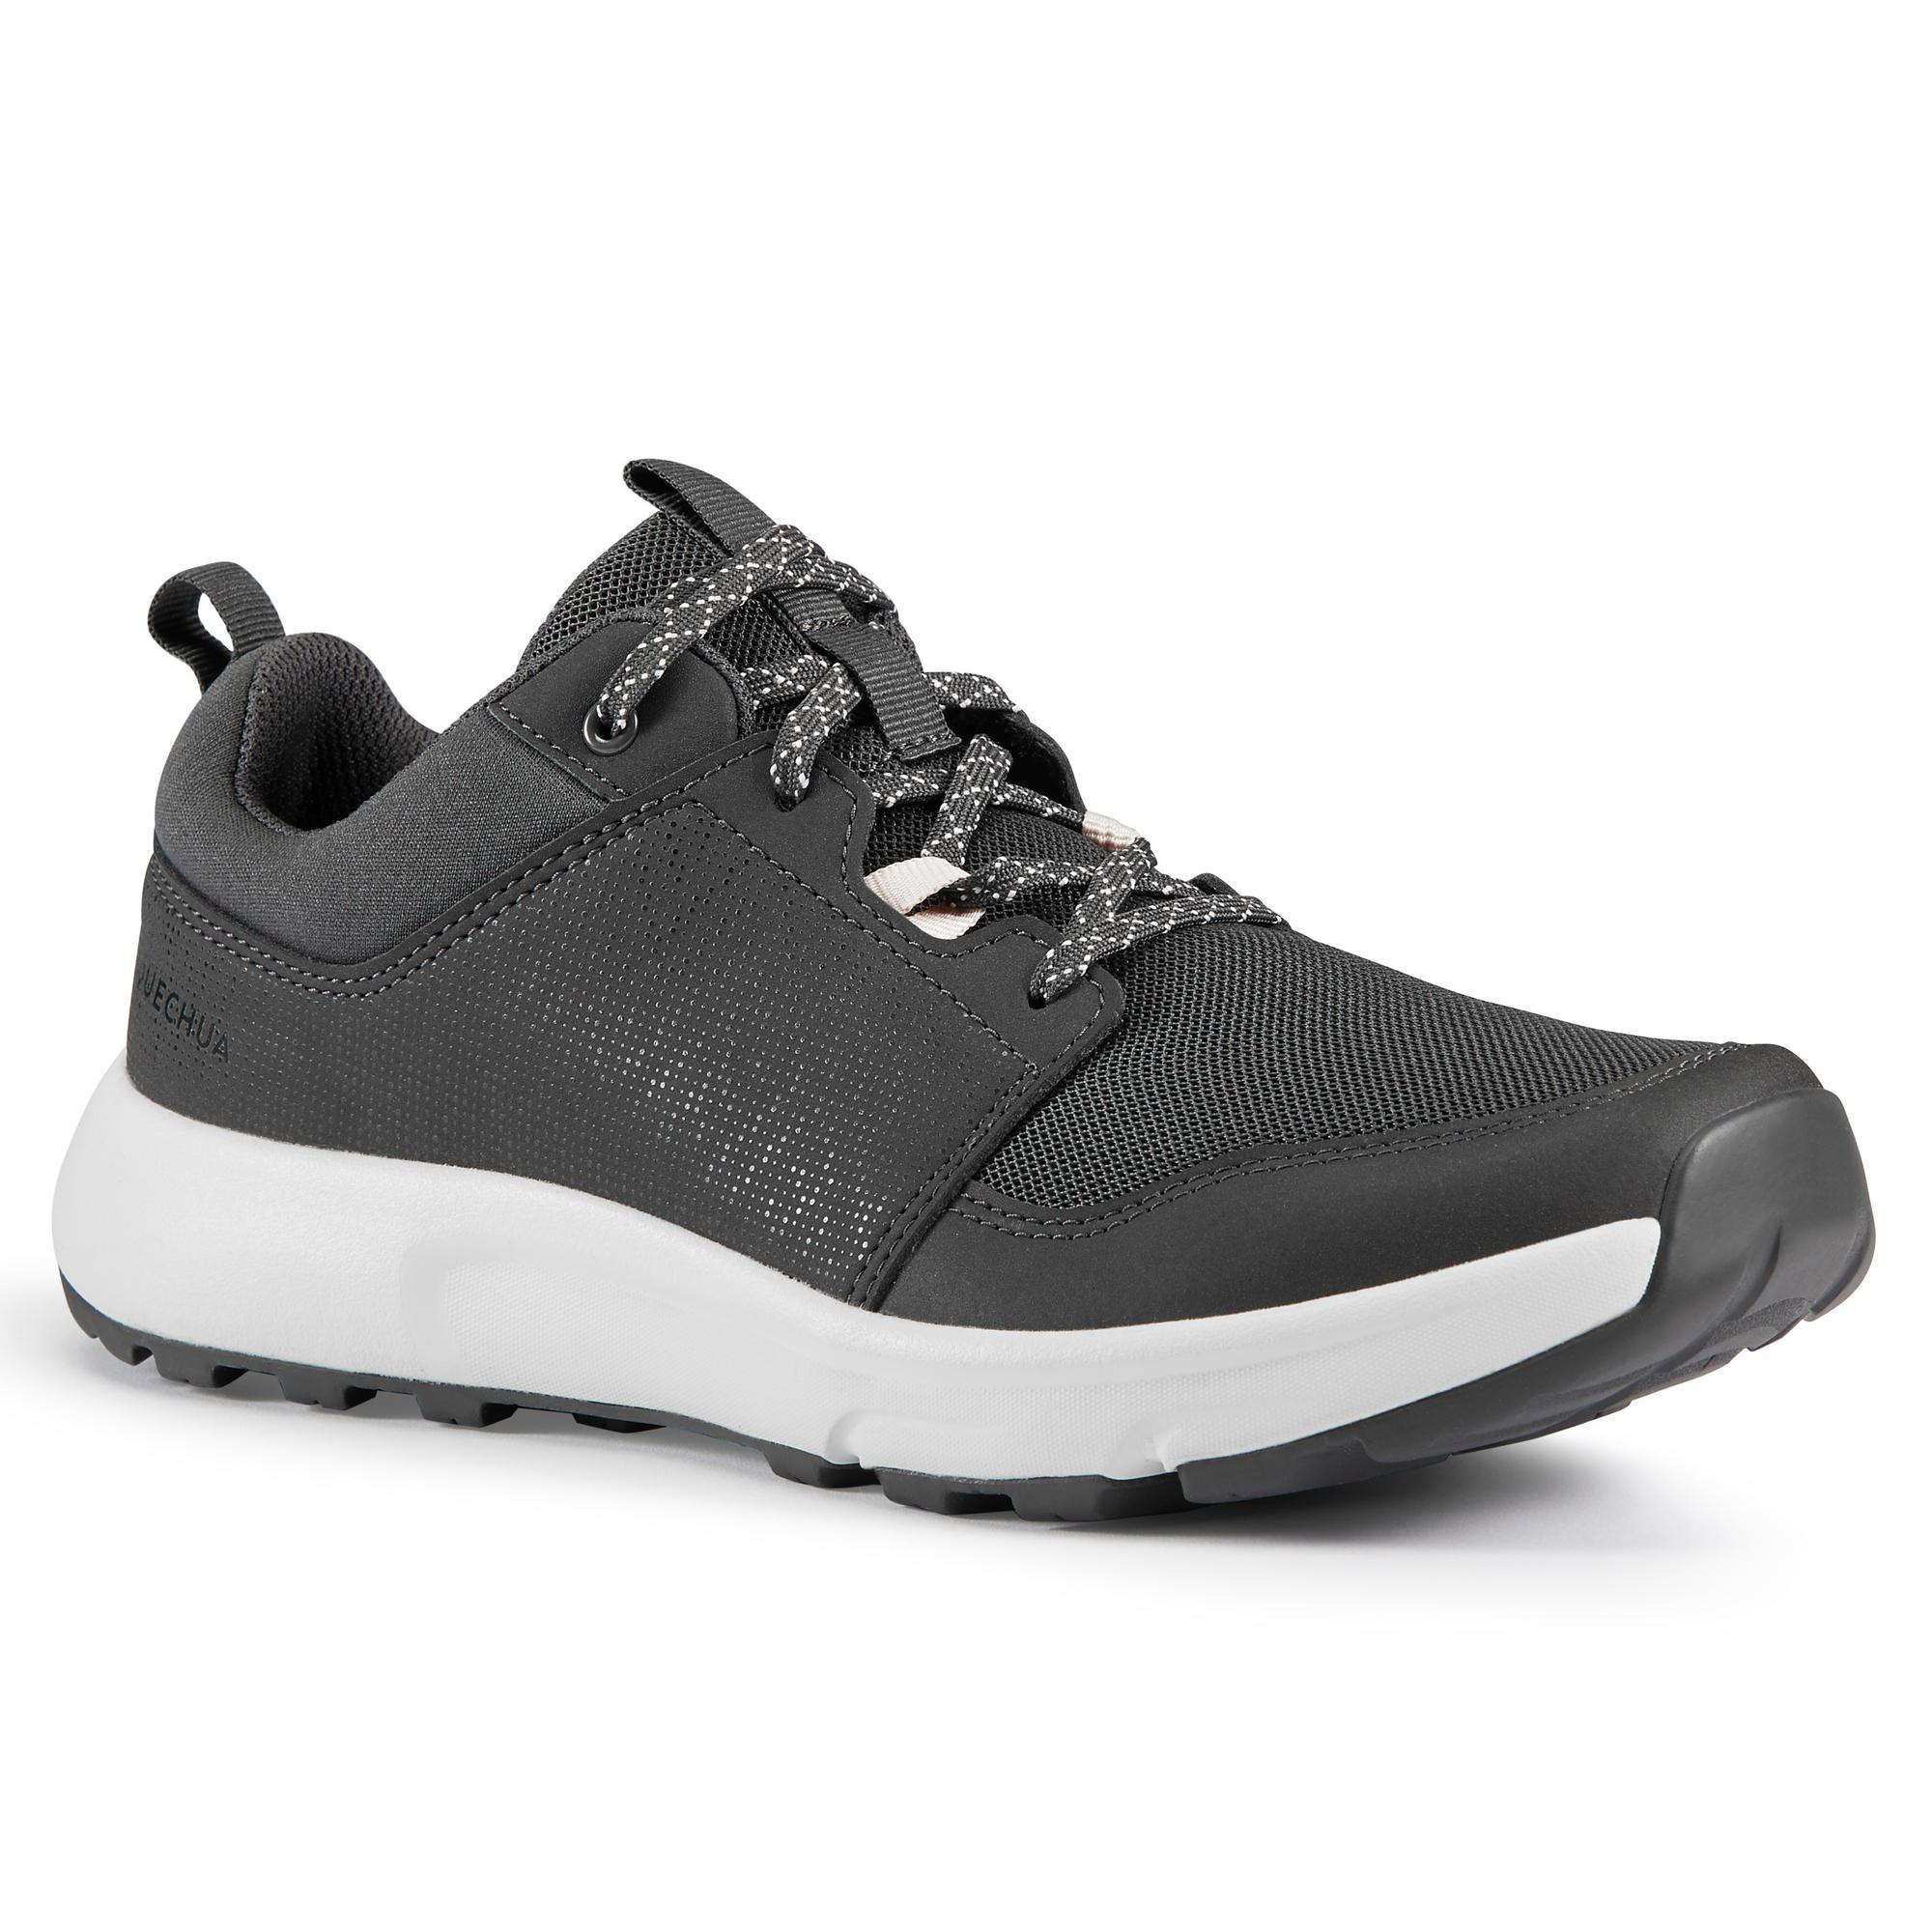 Country walking shoes - NH150 - Decathlon